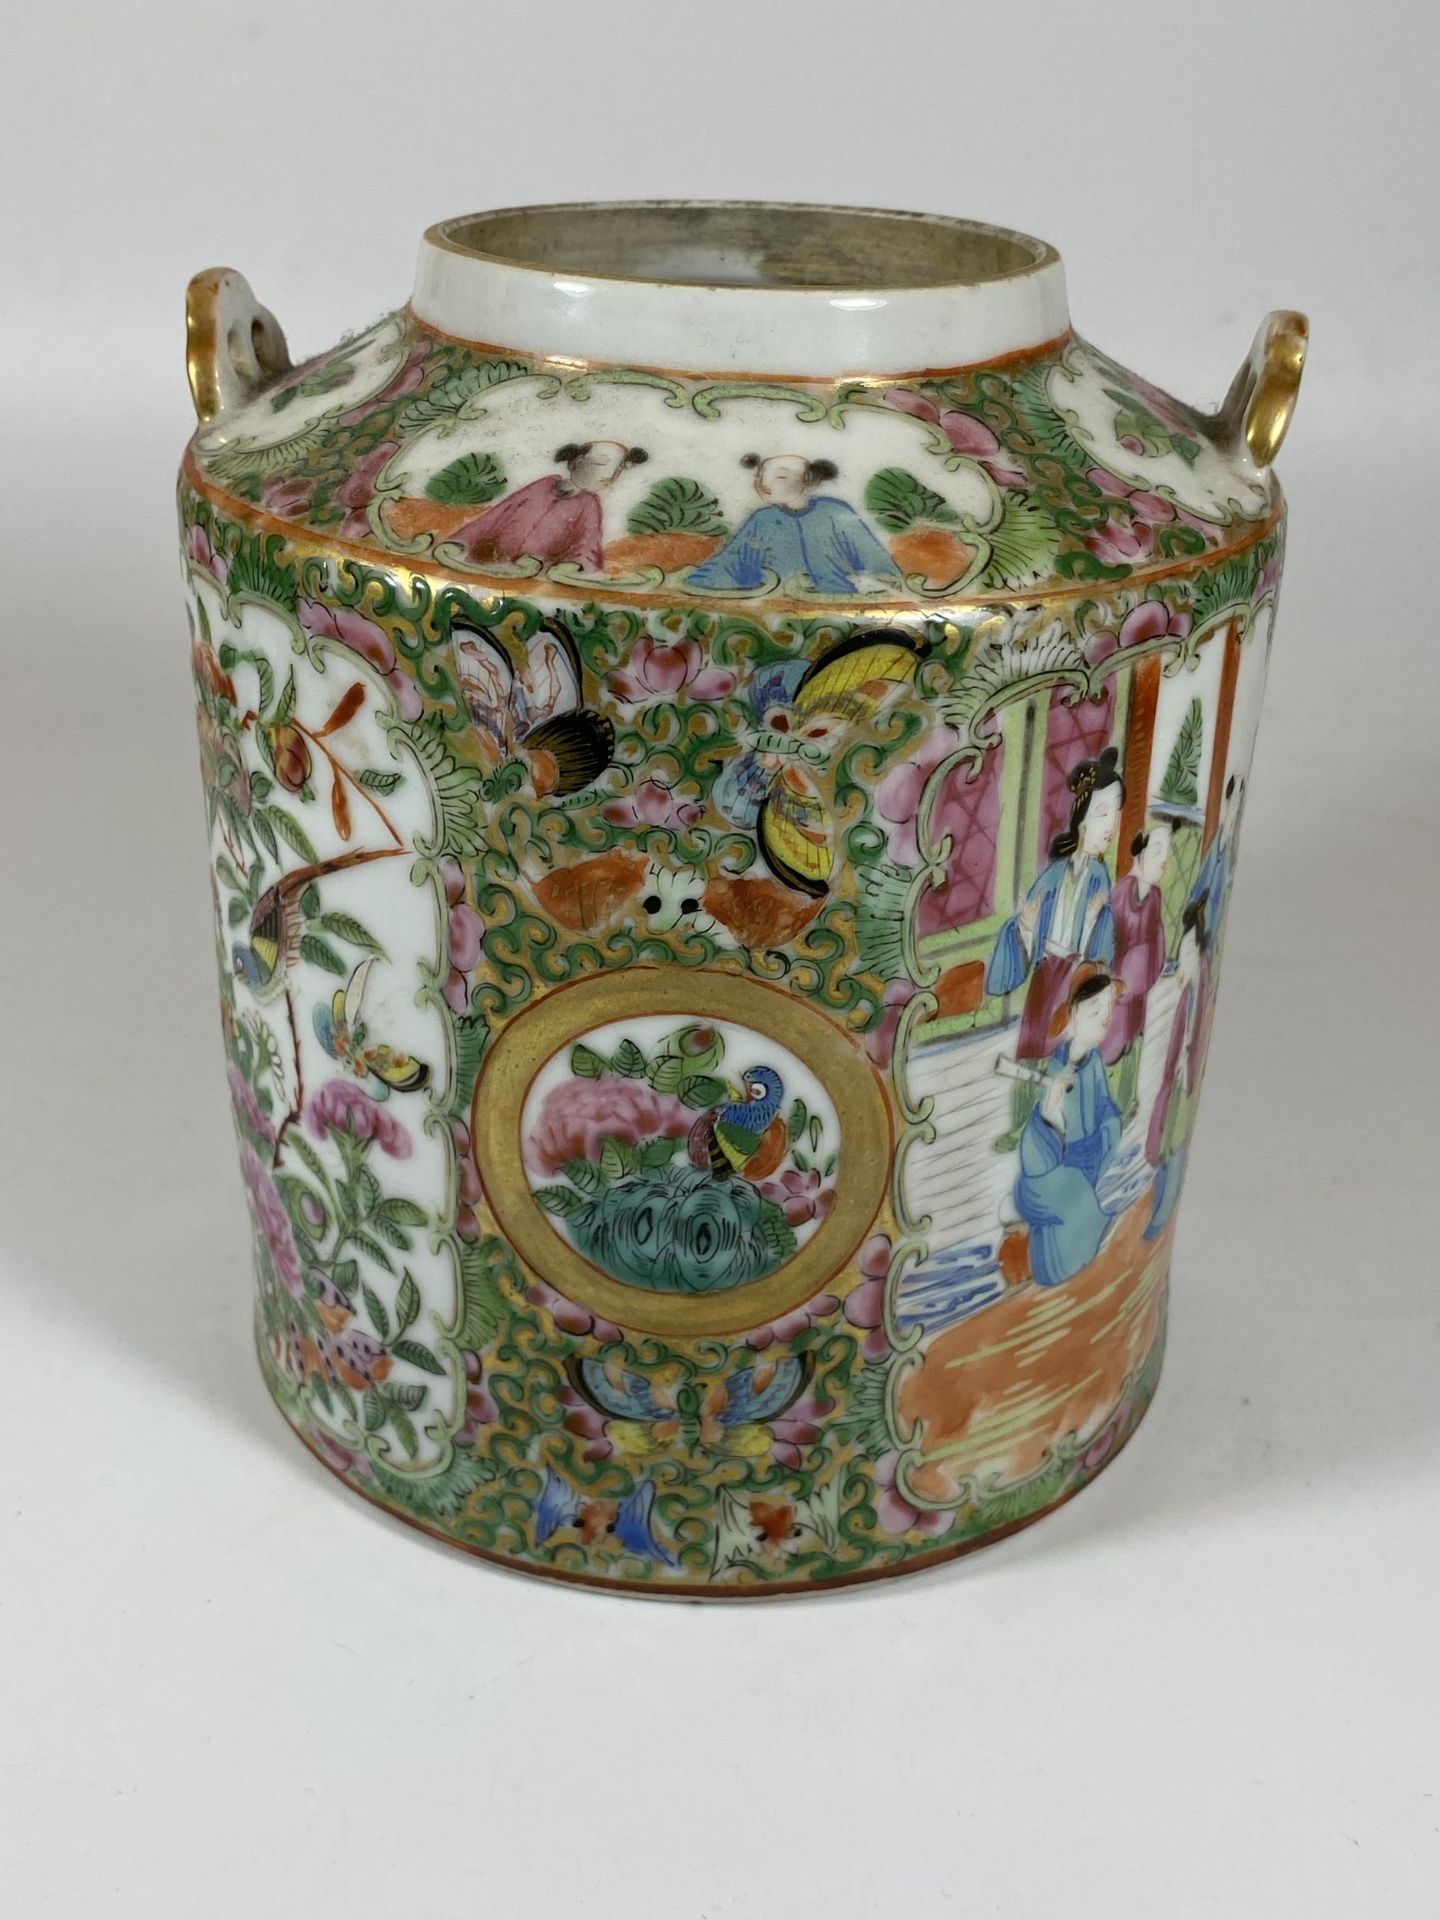 A 19TH CENTURY CHINESE CANTON FAMILLE ROSE MEDALLION TEAPOT (MISSING SPOUT), HEIGHT 16CM - Image 3 of 5